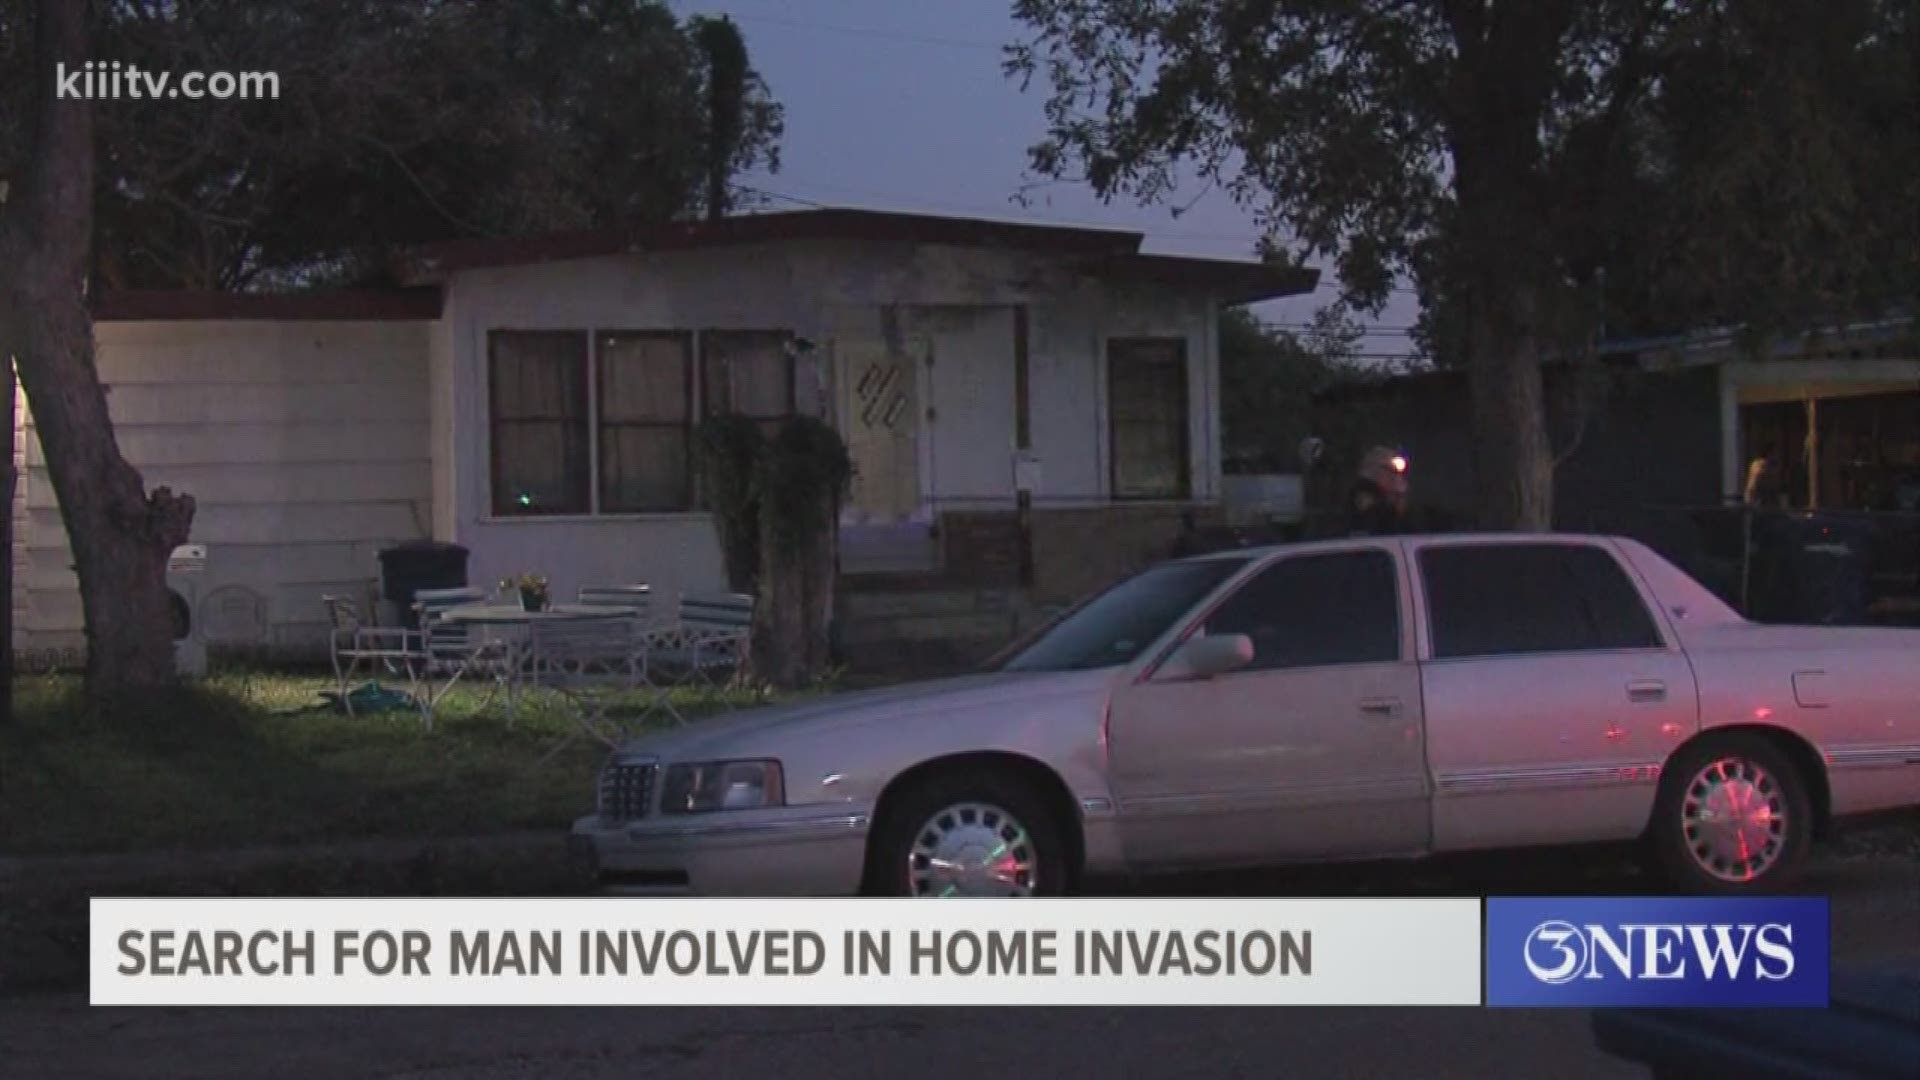 Police are searching for one of the men responsible for a home invasion on Kirkwood Drive near Gollihar that left two people inside the home hurt.